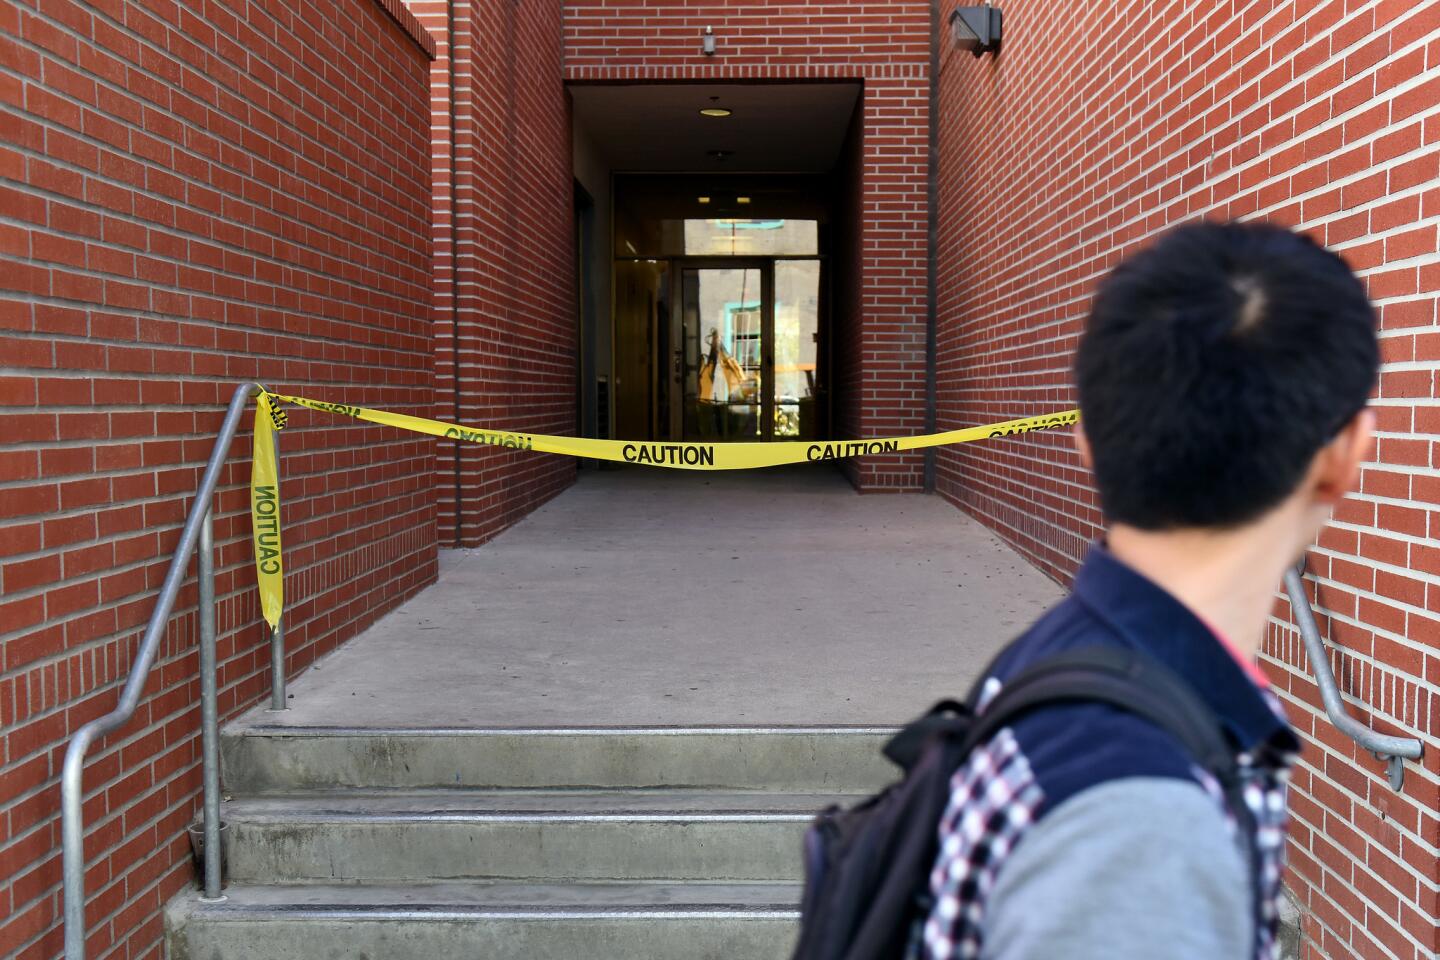 A student walks by the Seeley G. Mudd building on the USC campus where USC psychology professor Bosco Tjan was stabbed to death.